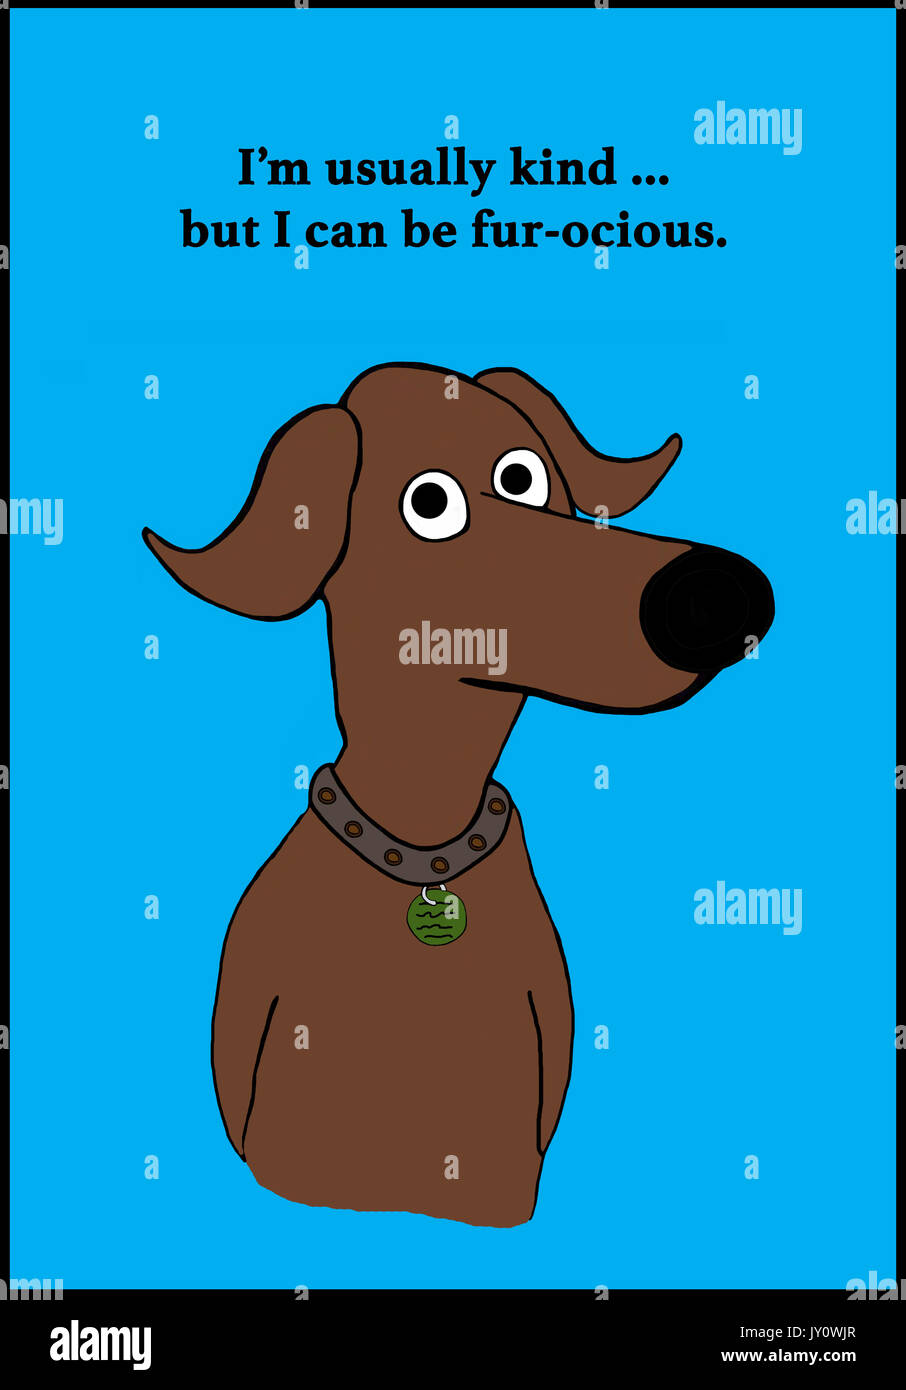 Cartoon illustration of a dog and a pun about ferocious. Stock Photo